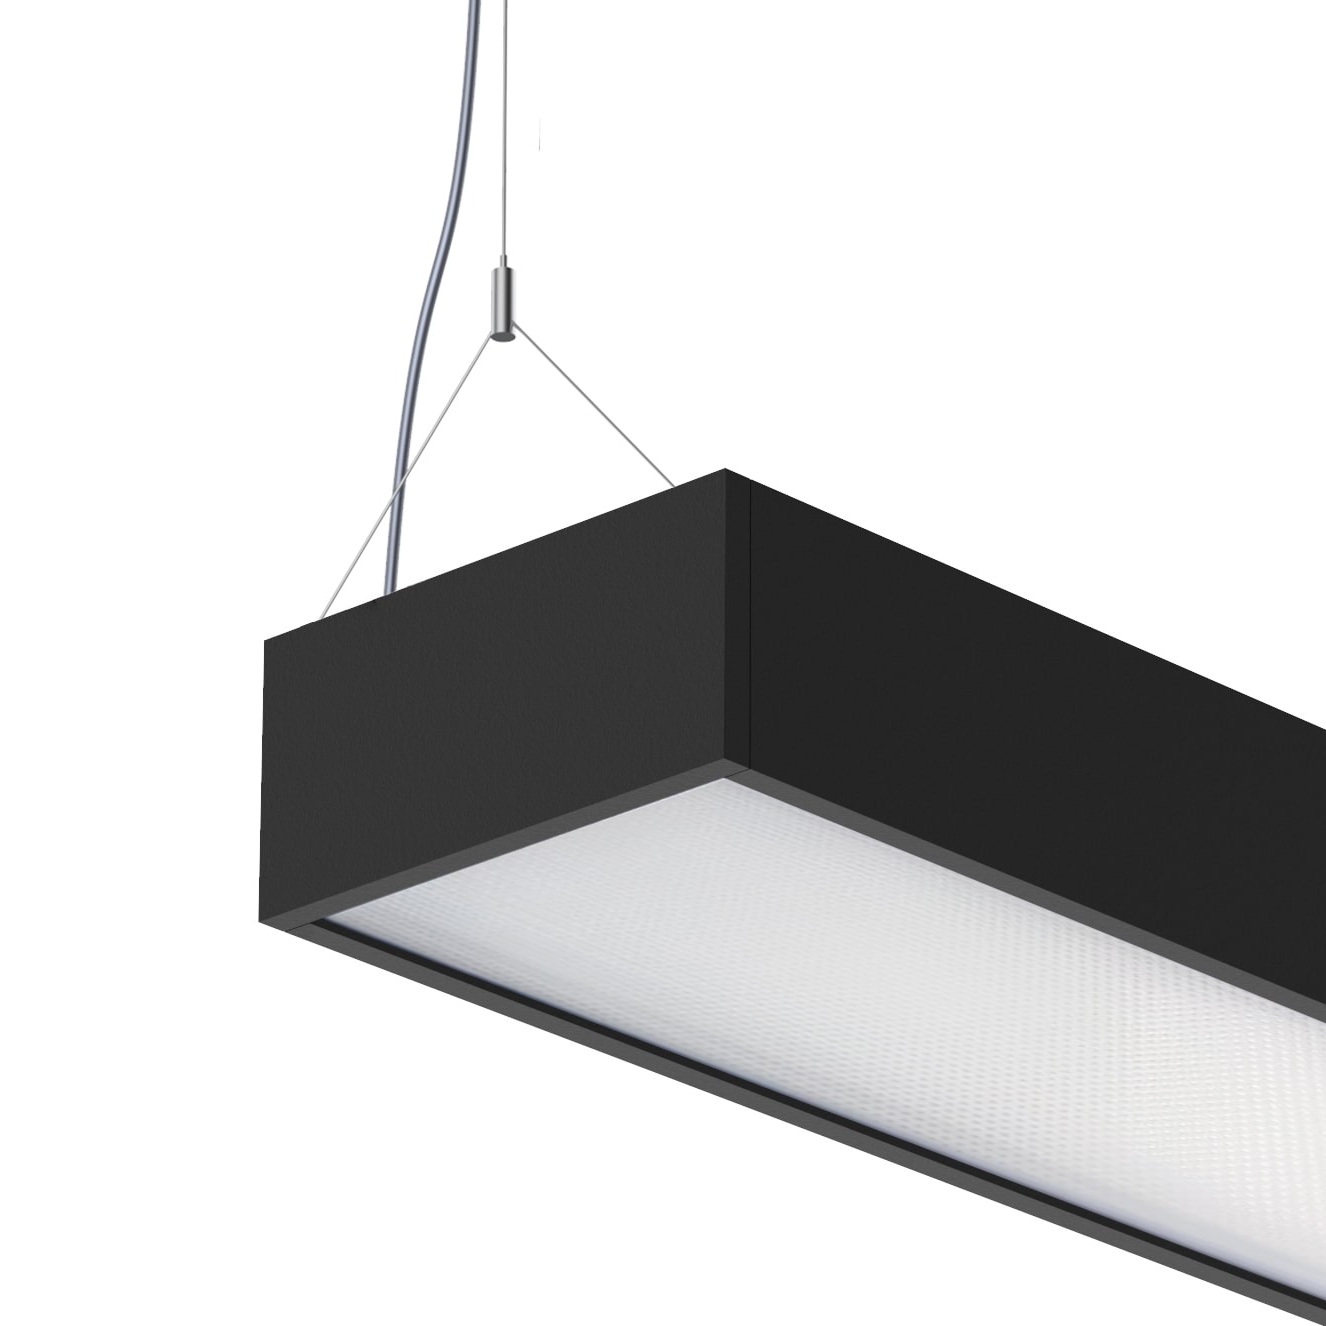 Indirect lighting products